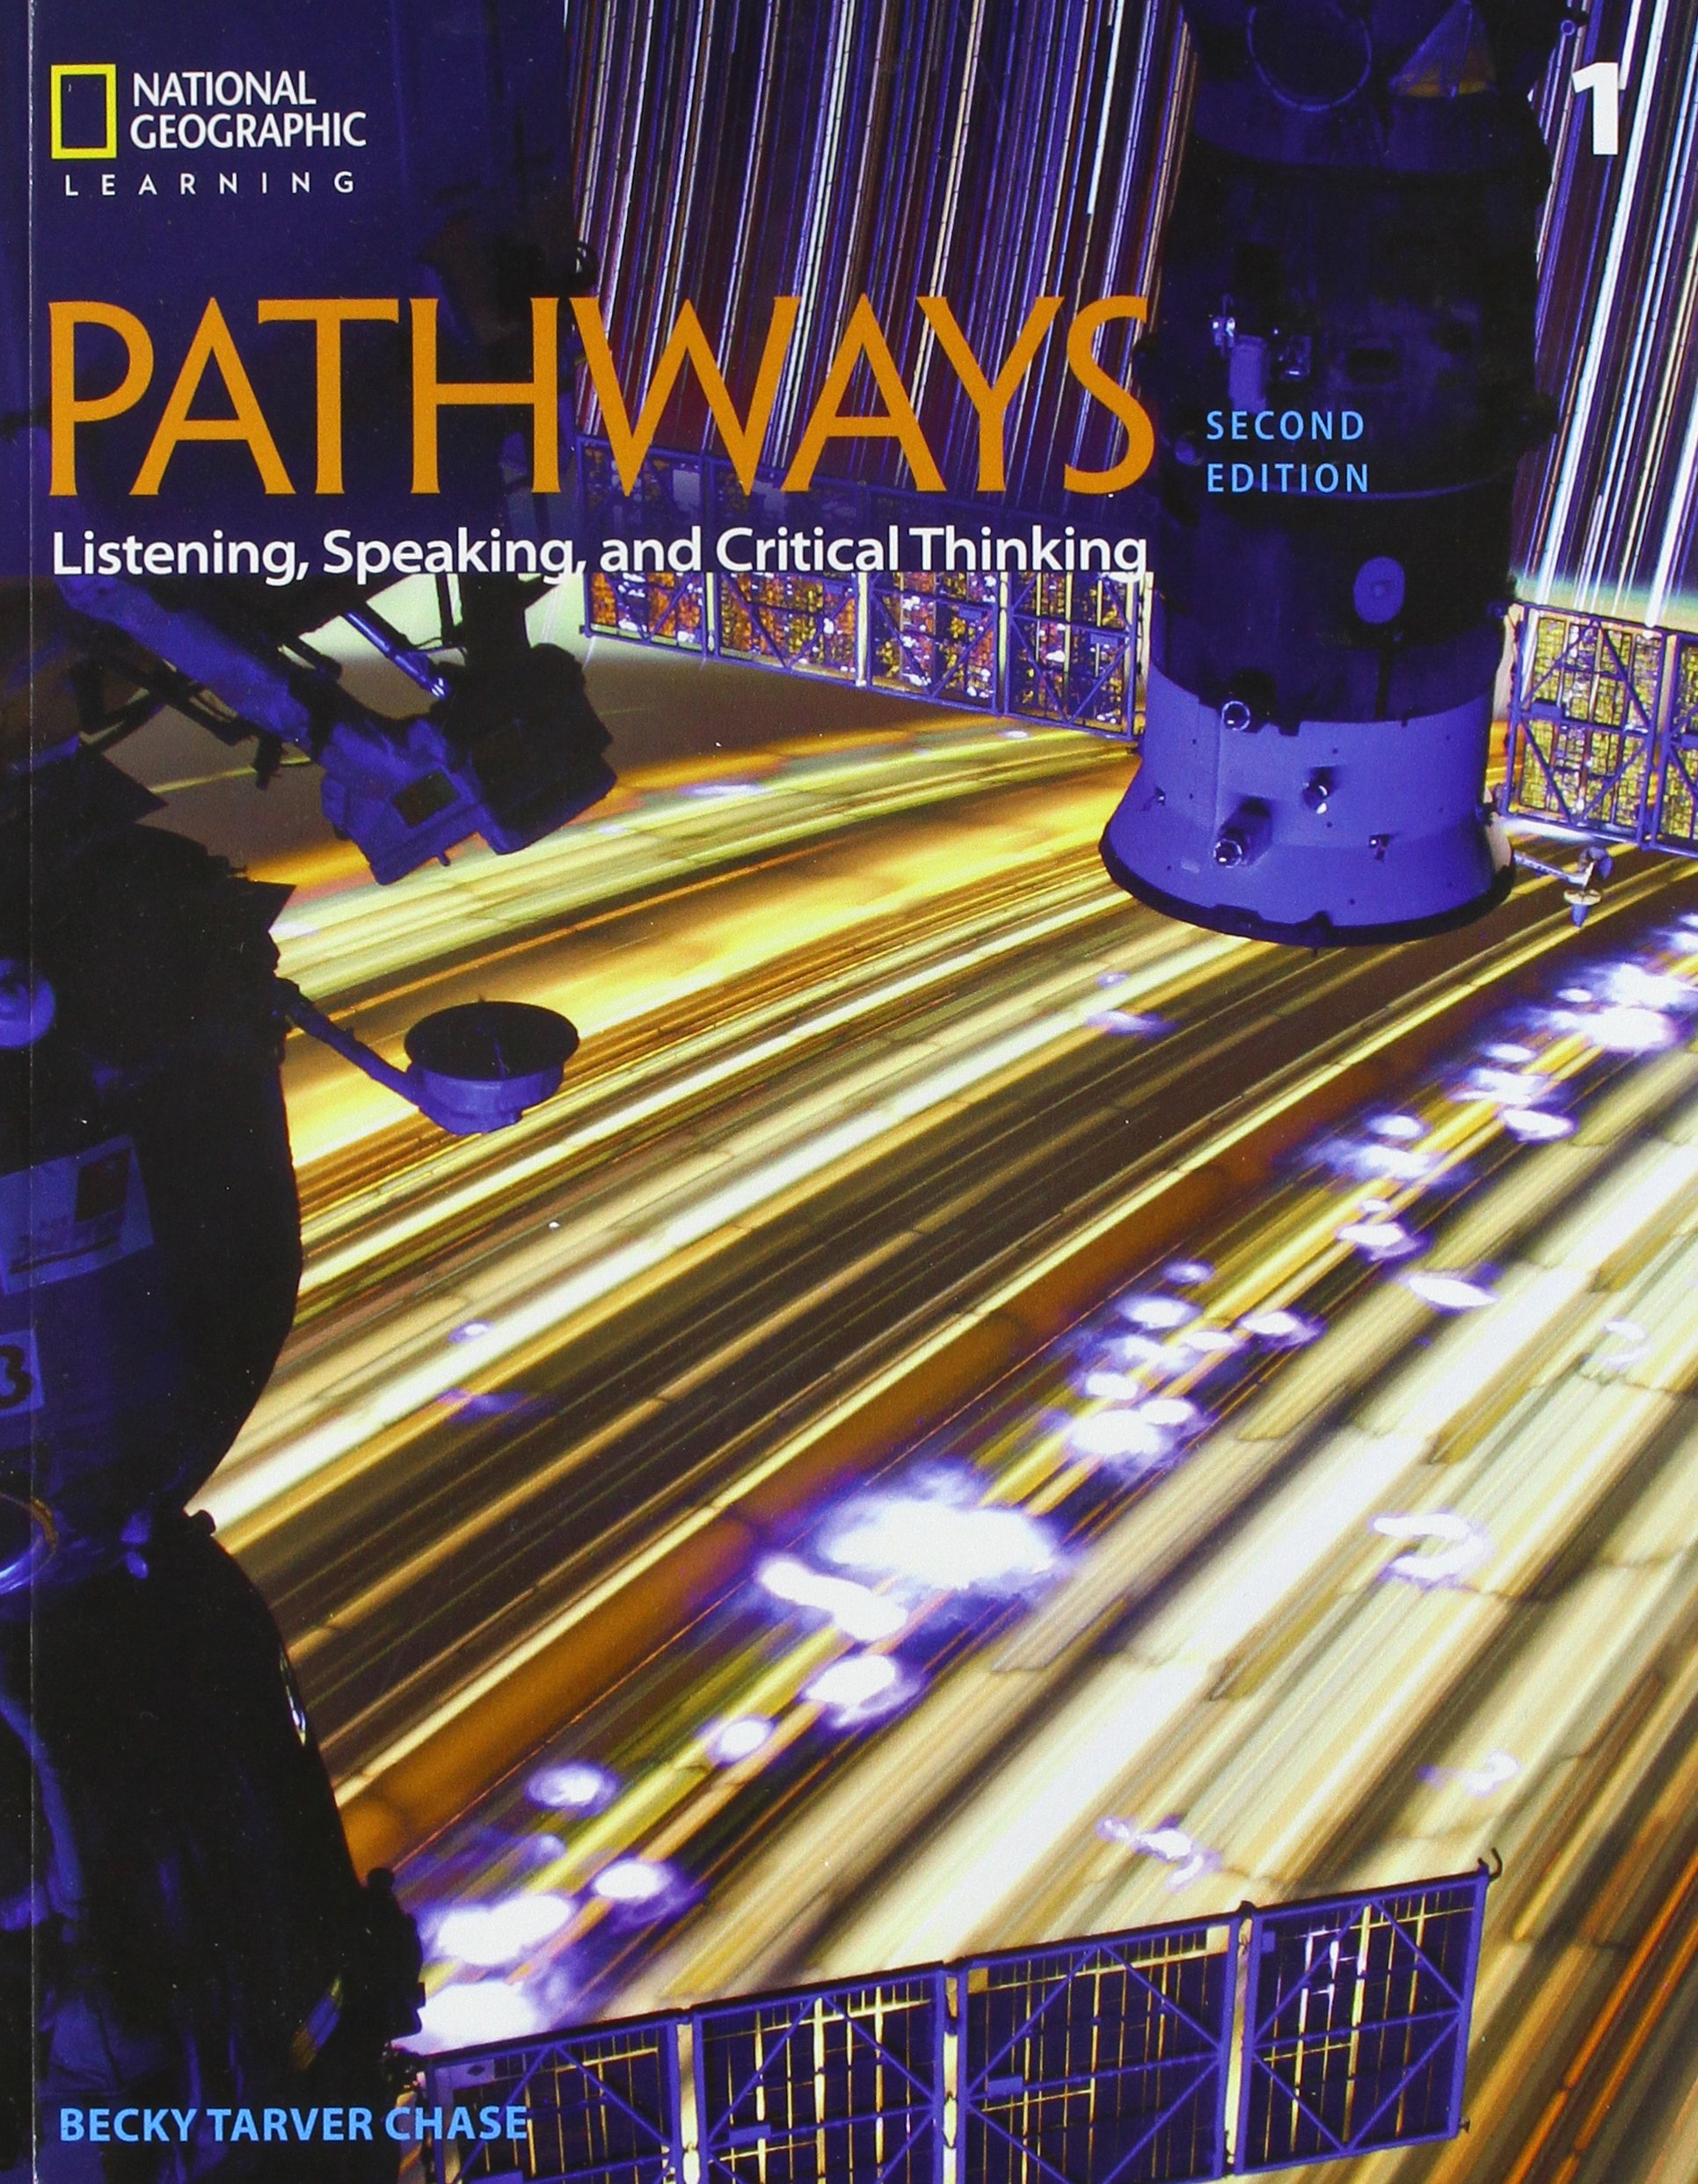 pathways 2 listening speaking and critical thinking 2nd edition